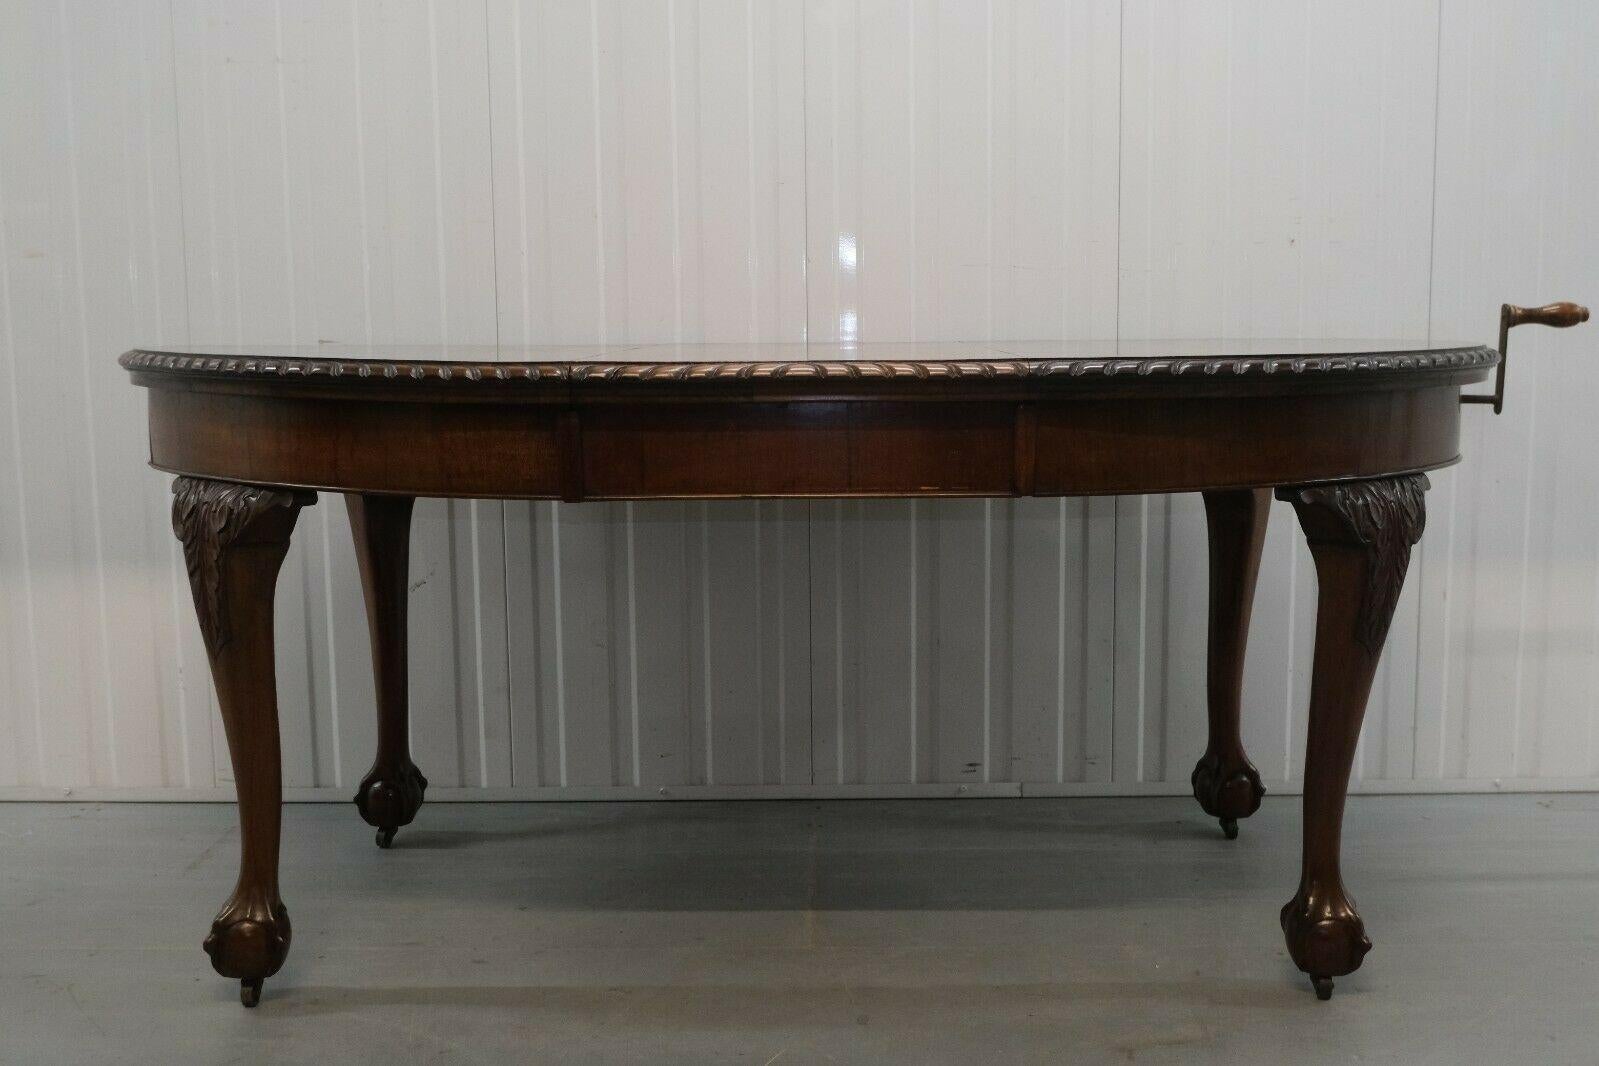 English Hardwood Extending Dining Table One Leaf Cabriole Legs with Claw & Ball Feet